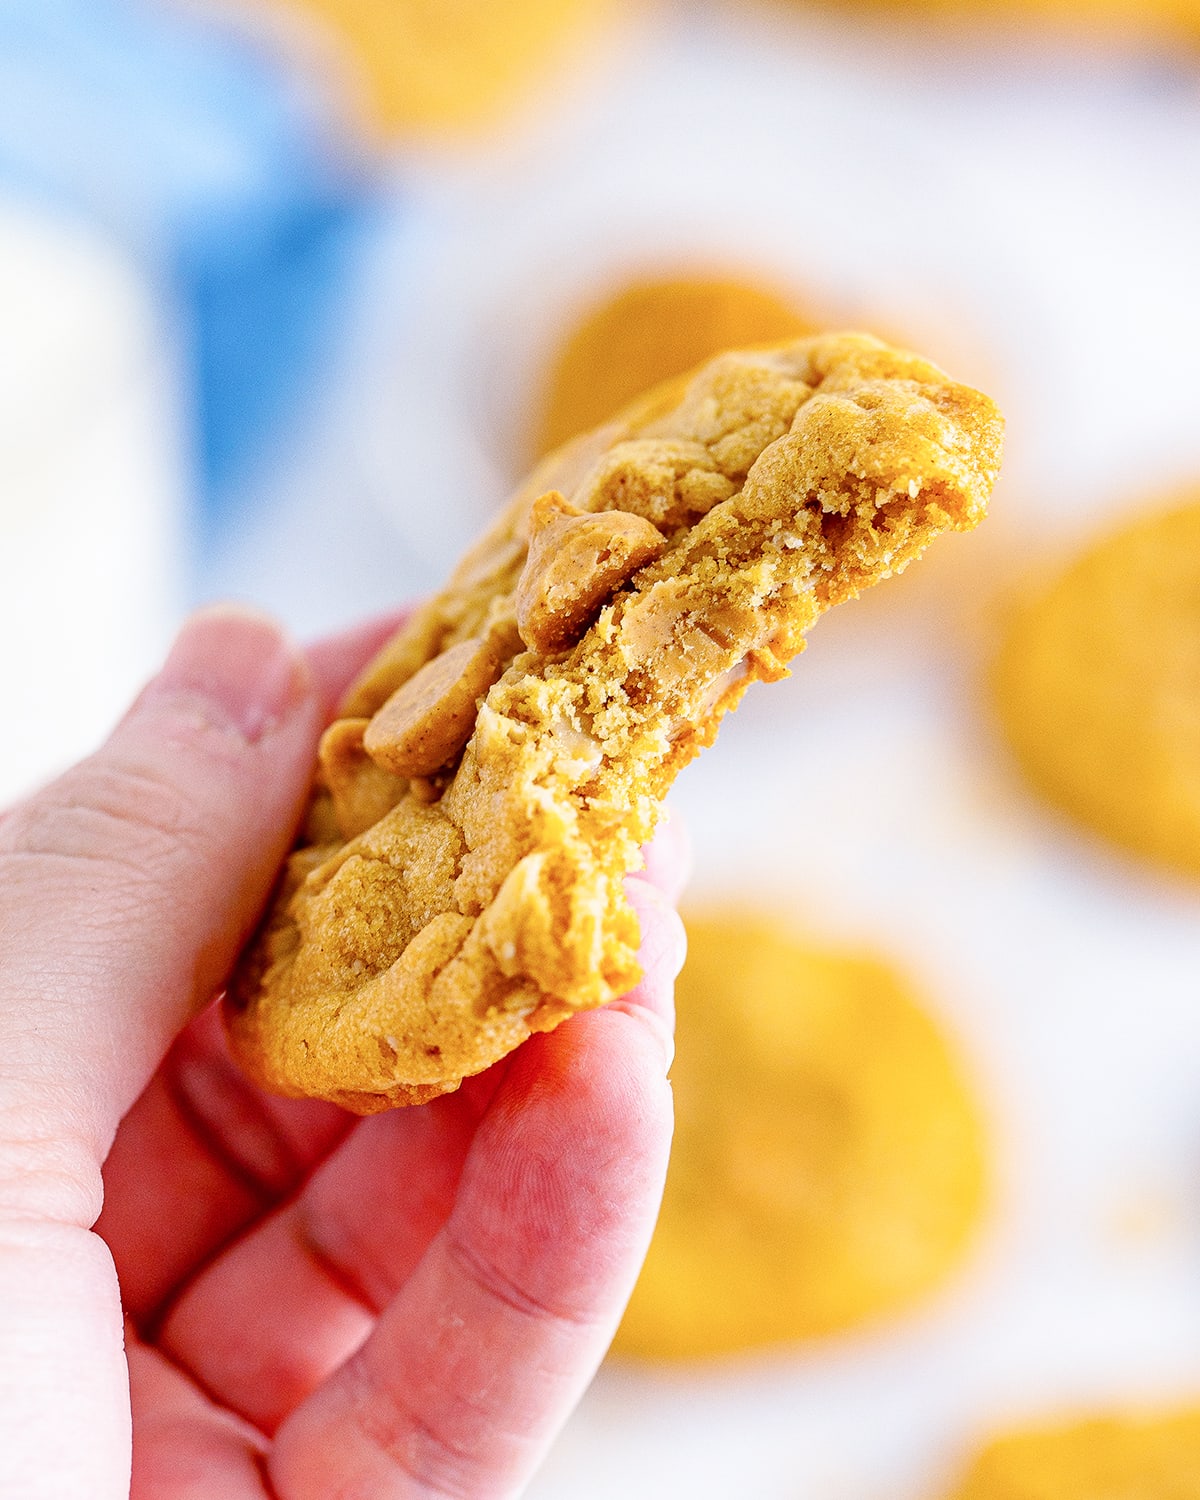 A hand holding a peanut butter cookie with a bite out of it.